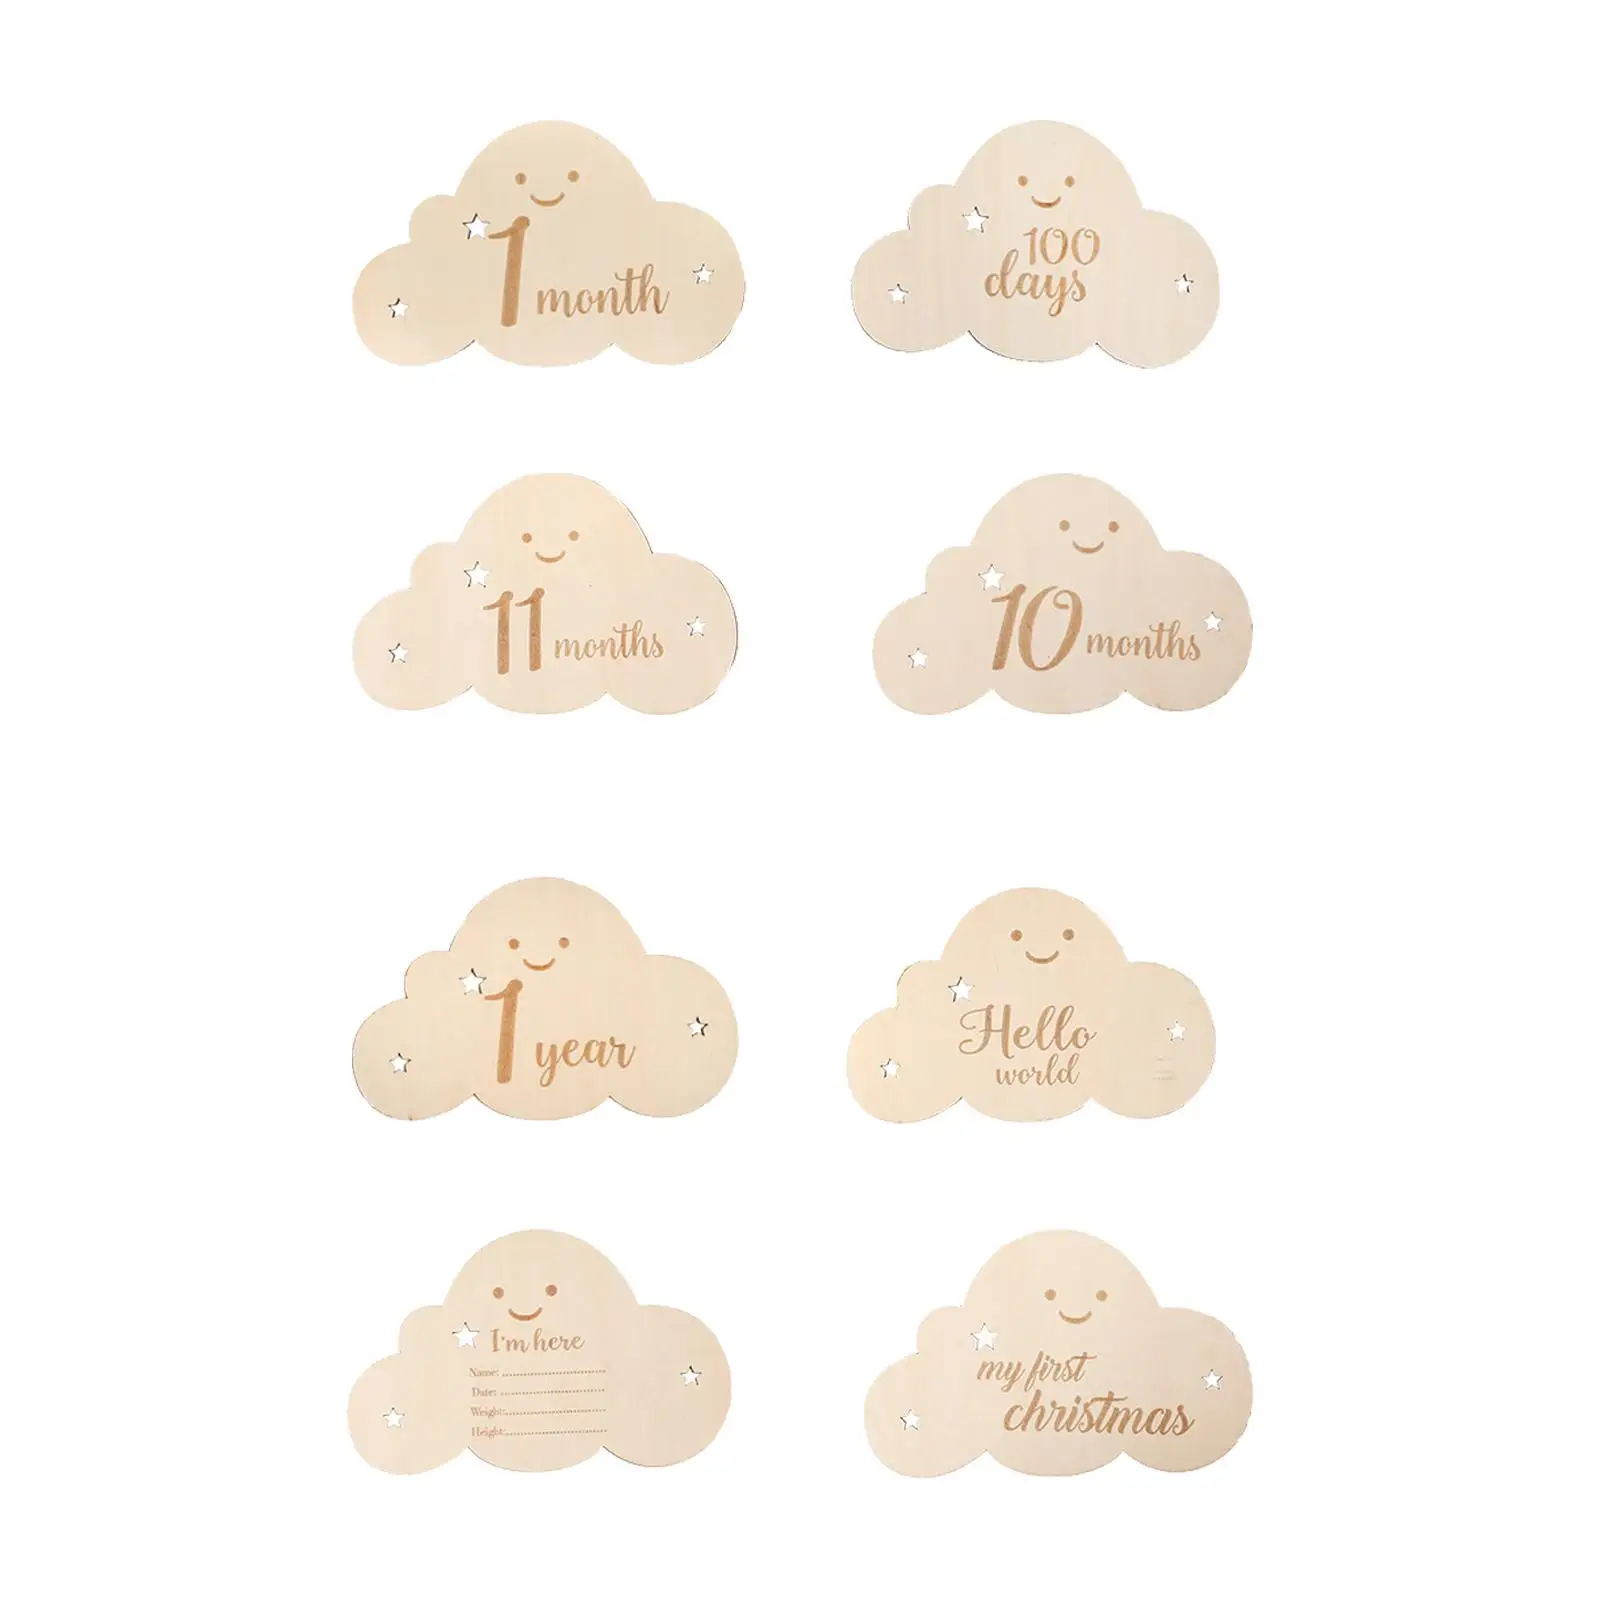 8x Wooden Baby Milestone Cards Keepsake Toy Cute Clouds Shape for Newborn to Age 1 New Mom Gifts Record Growth Monthly Stickers